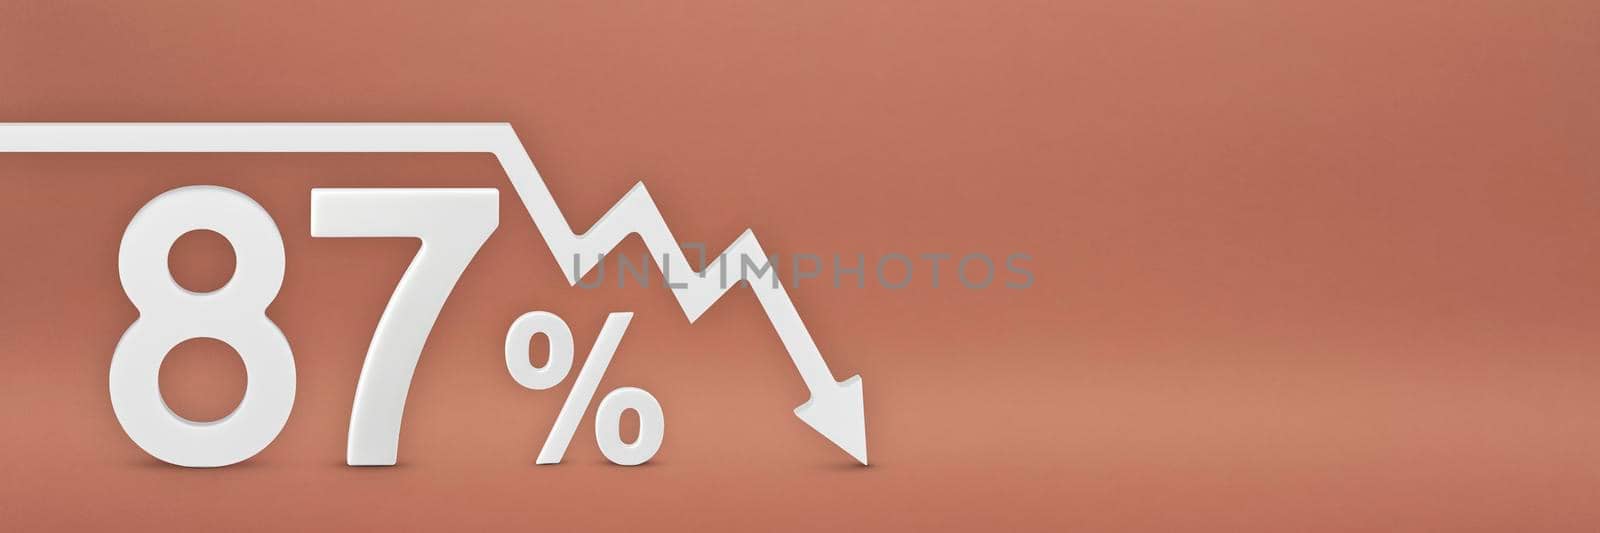 eighty-seven percent, the arrow on the graph is pointing down. Stock market crash, bear market, inflation.Economic collapse, collapse of stocks.3d banner,87 percent discount sign on a red background